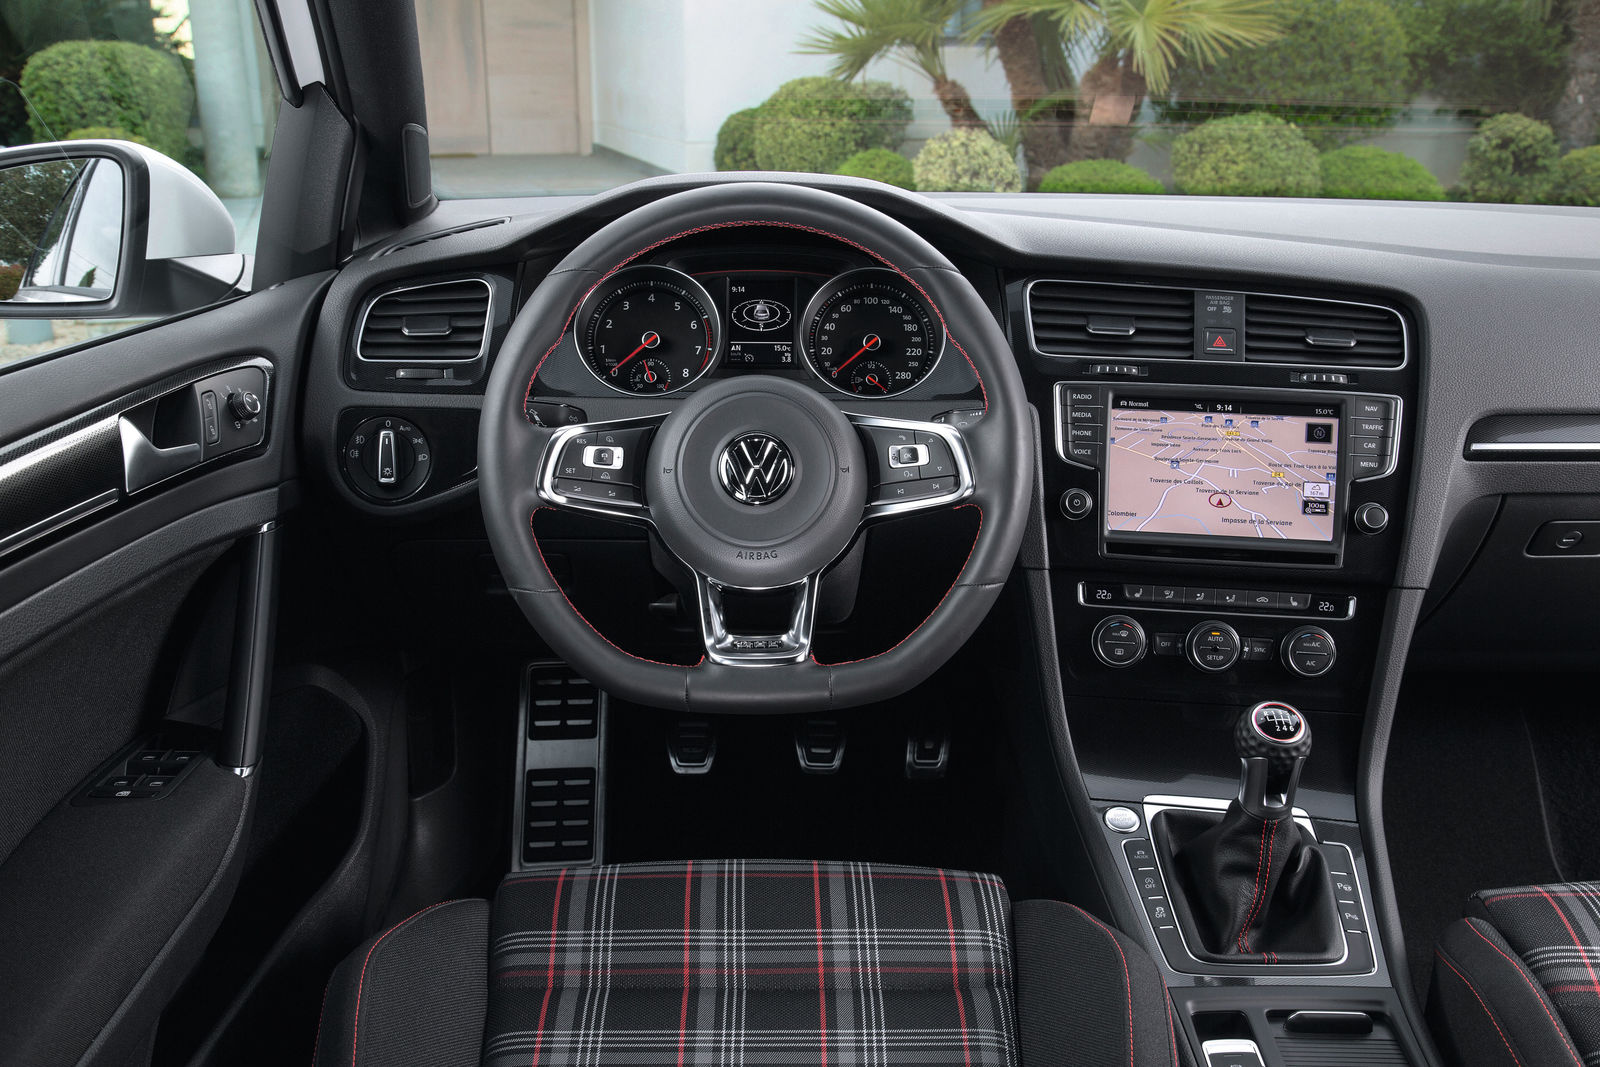 115085 Mk7, review, interior, Volkswagen, concept, sports car, Volkswagen  Golf R400, test drive - Rare Gallery HD Wallpapers